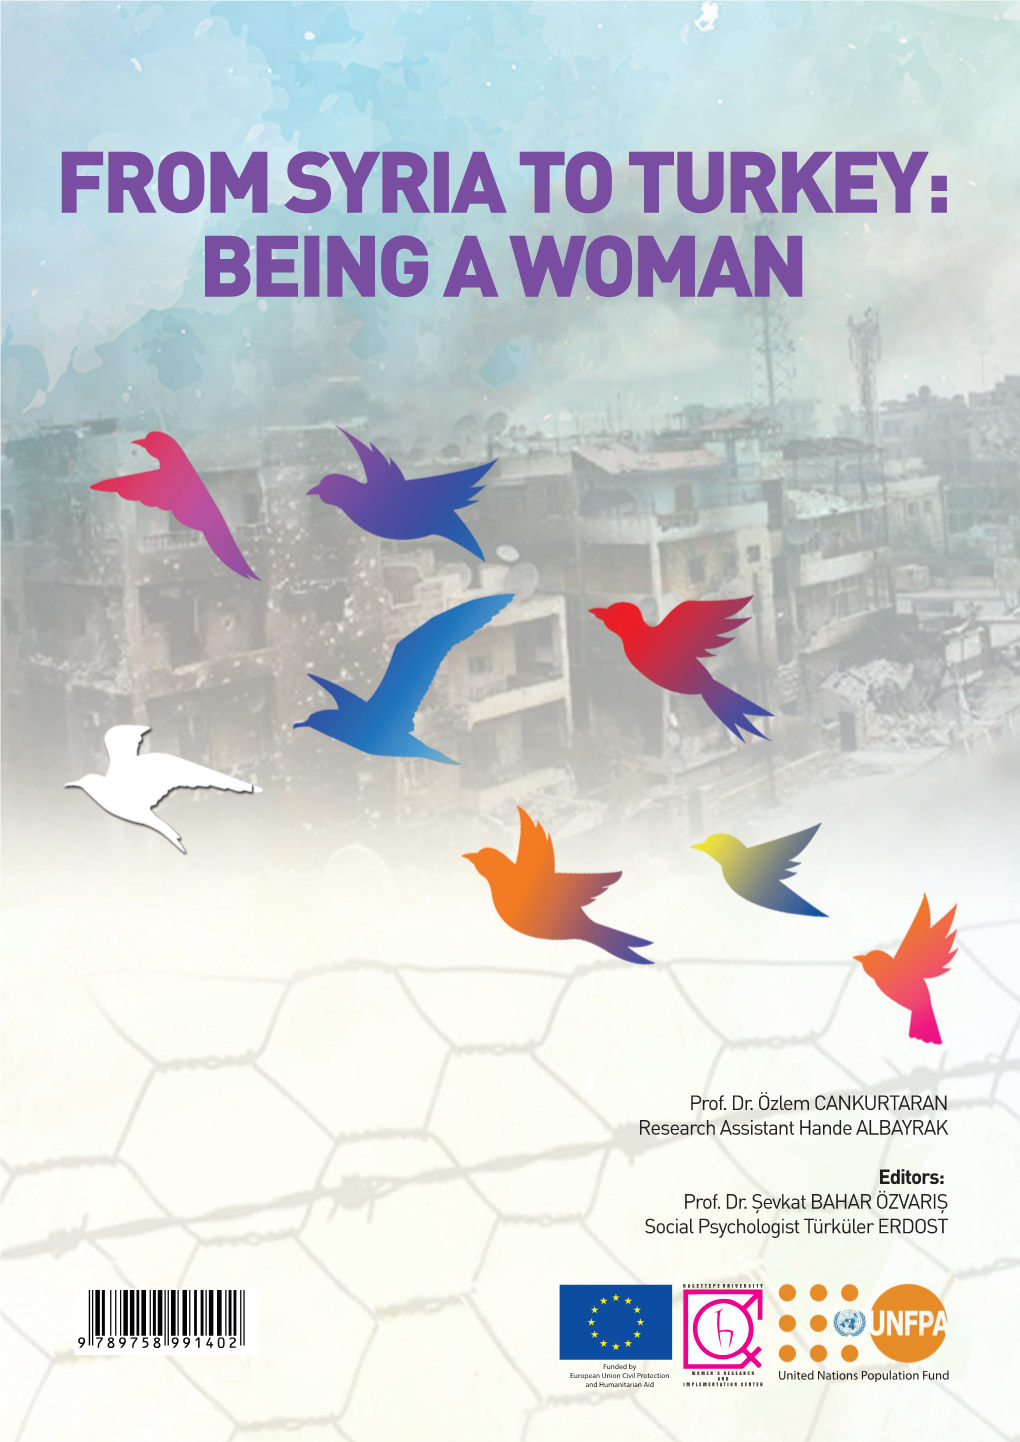 From Syria to Turkey: Being a Woman